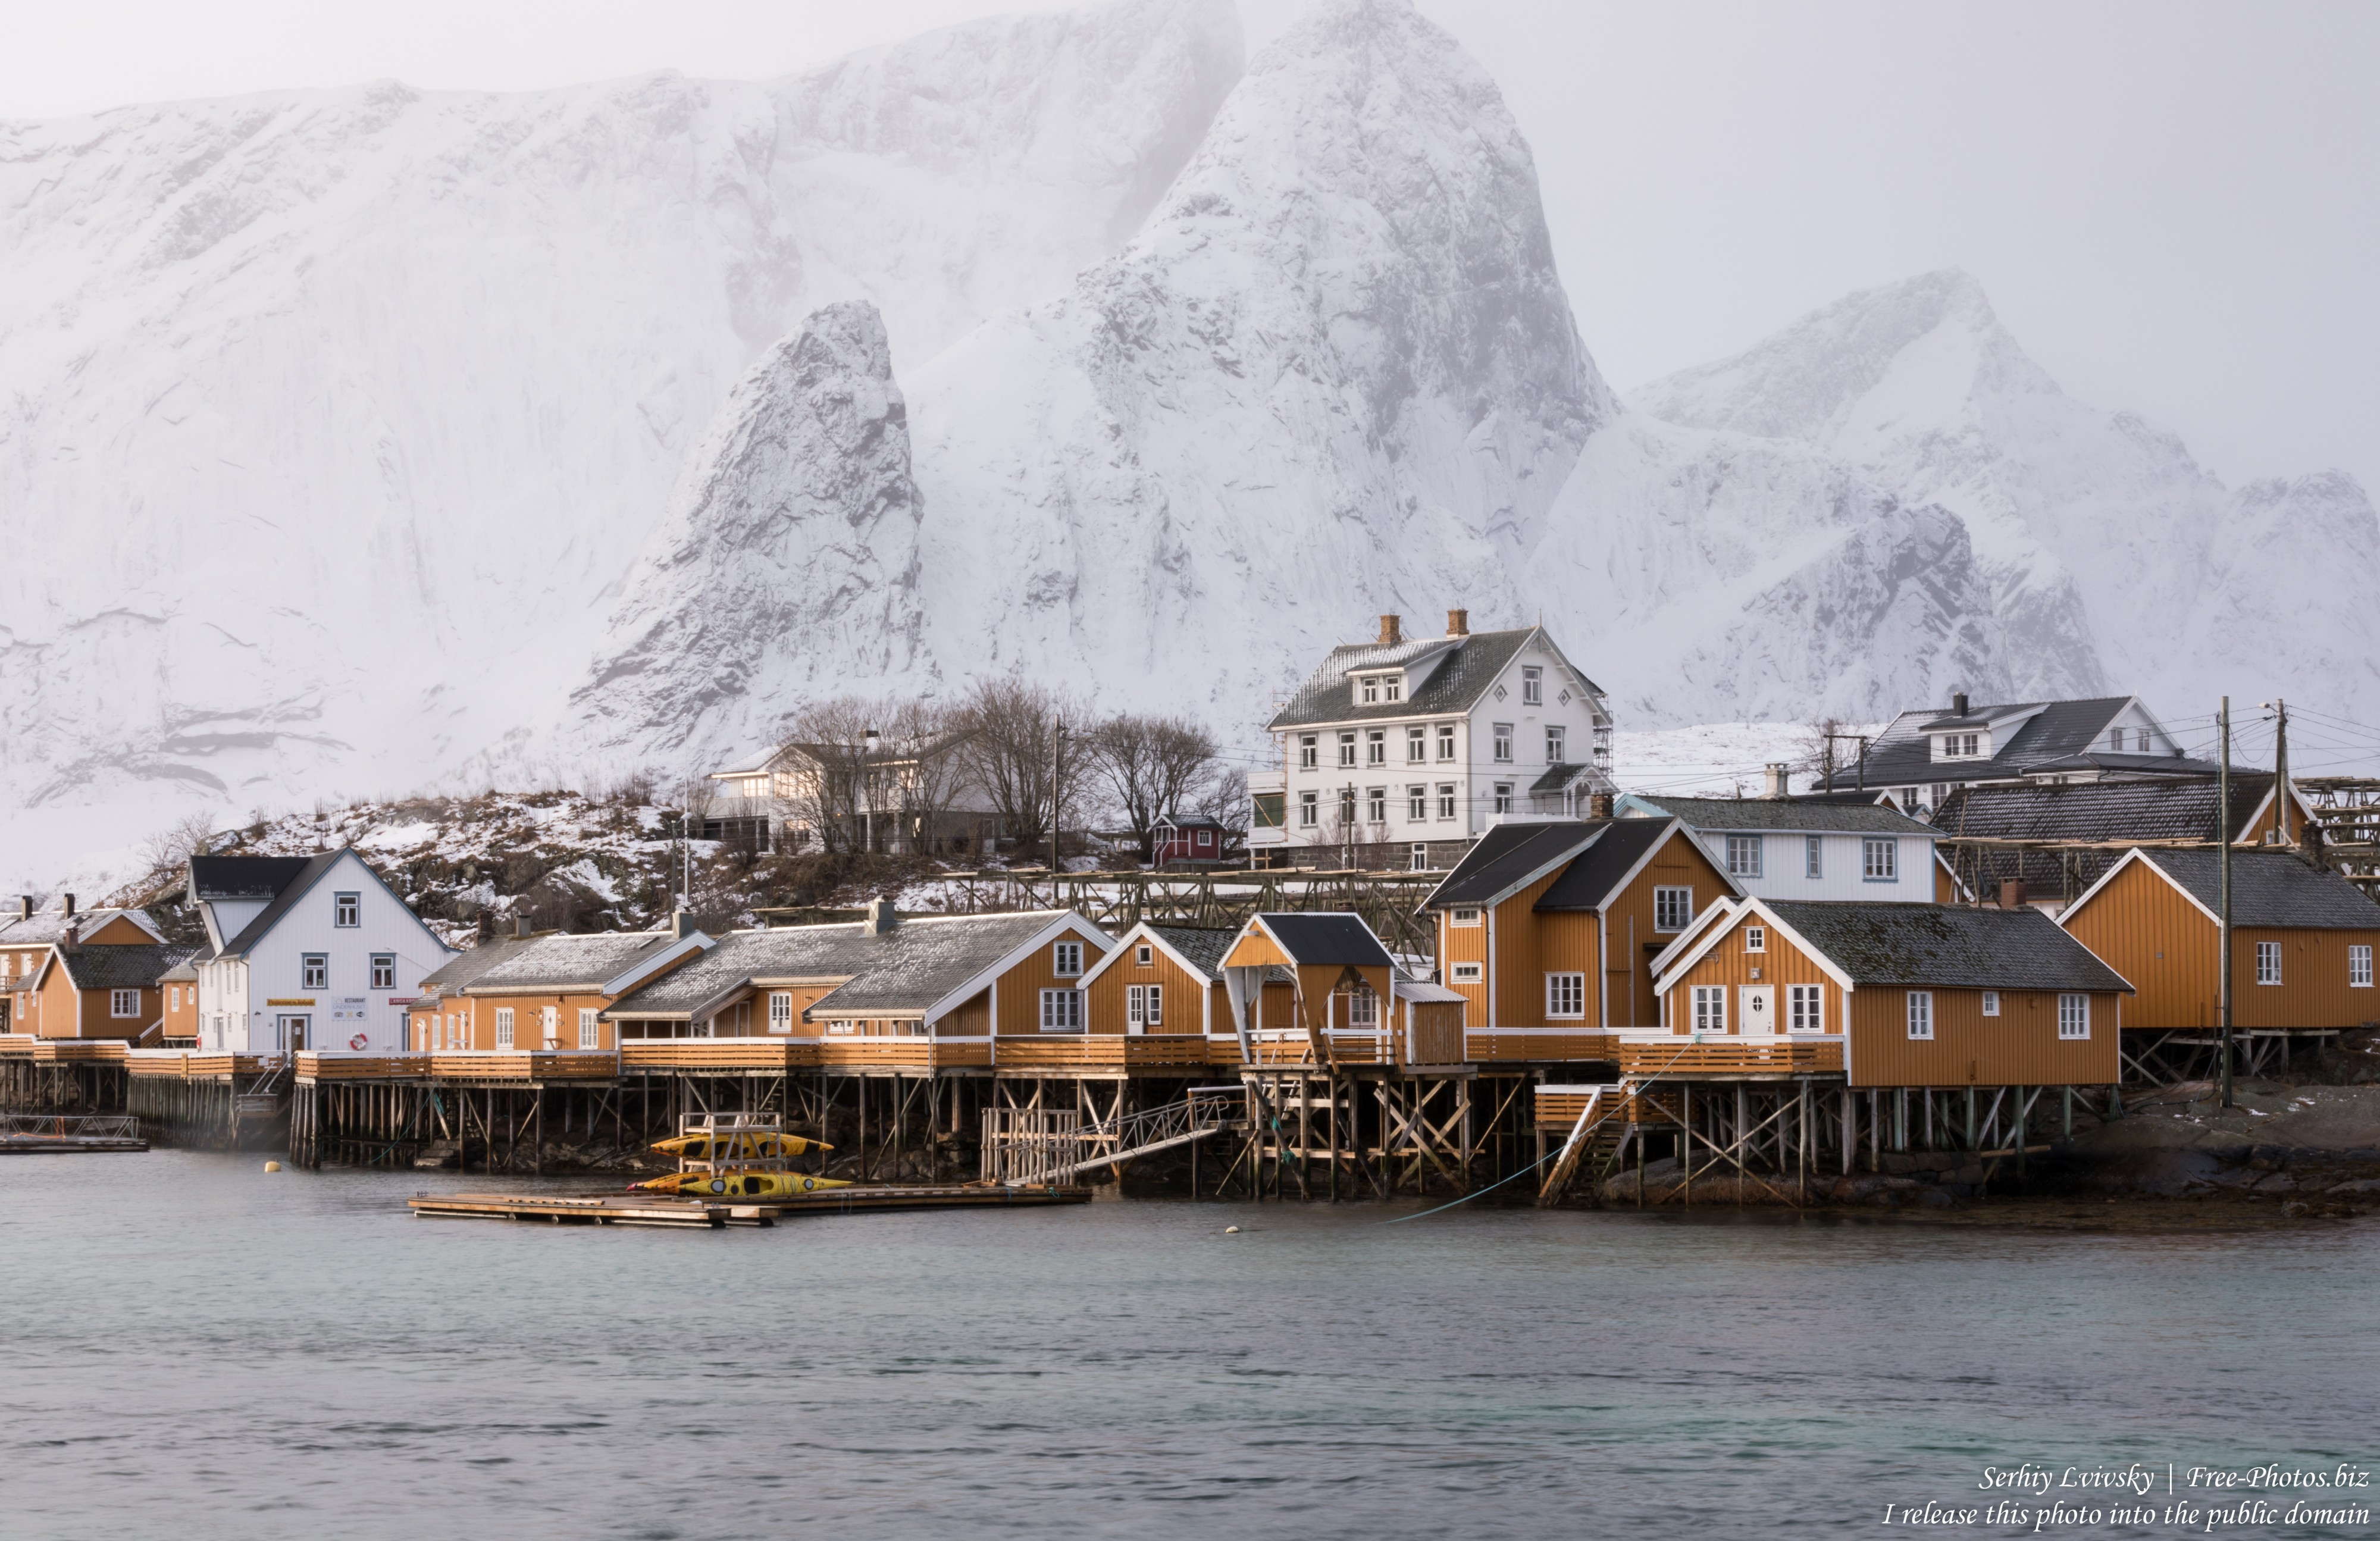 Sakrisoy and surroundings, Norway, in February 2020 by Serhiy Lvivsky, picture 12